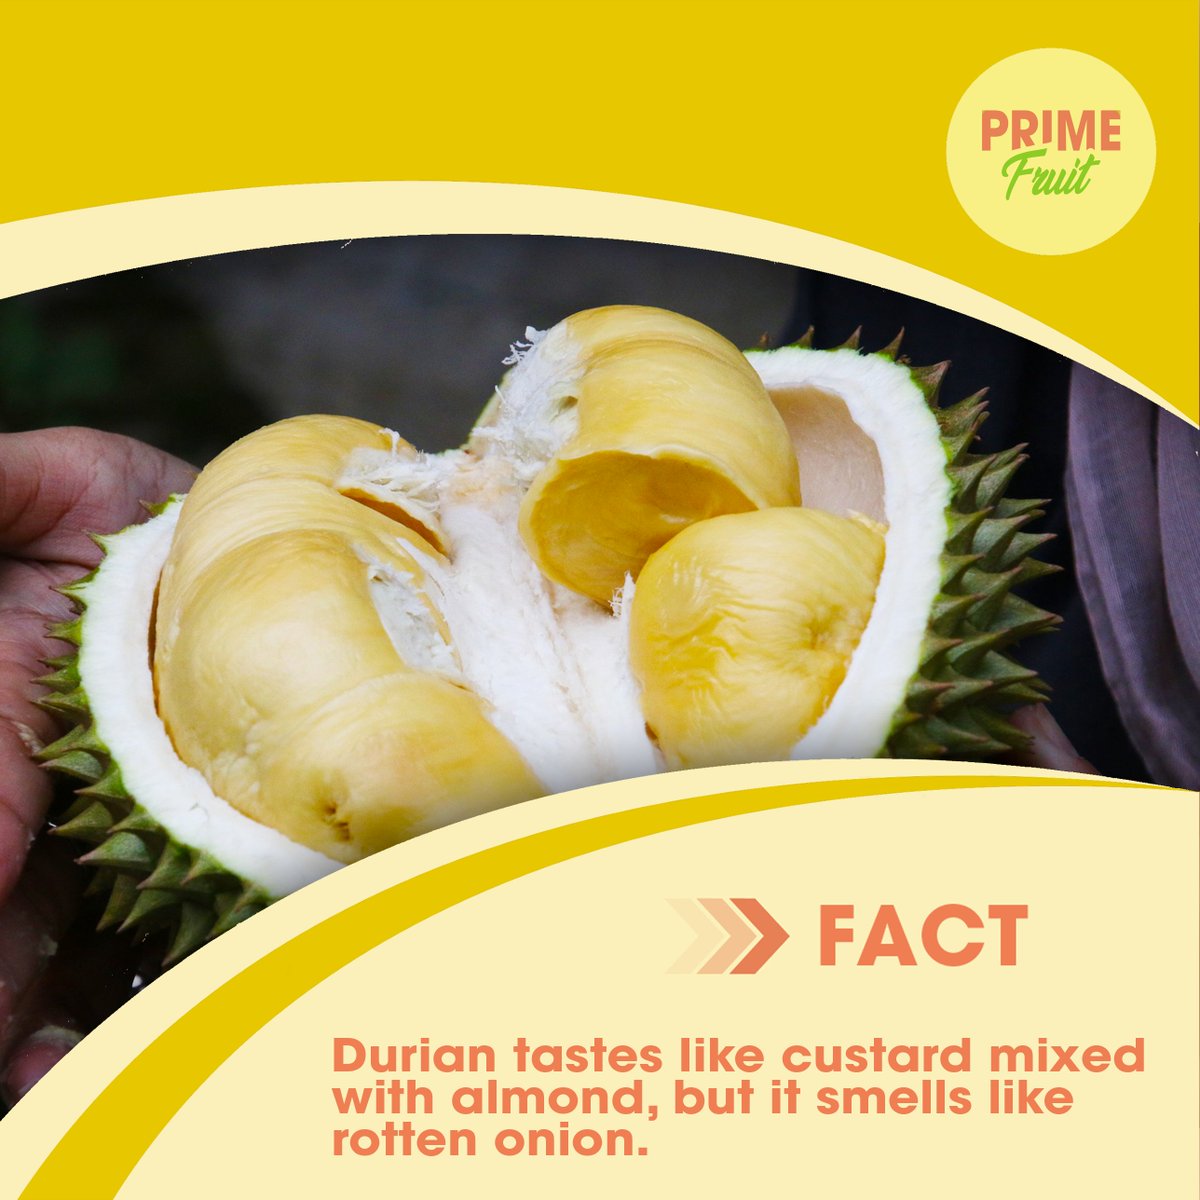 Did you know that durian is banned in the public transportation, hotels and airplanes in some parts of southeast Asia because of its unpleasant aroma?
 
#dxblife #UAE
#mydubailife #dxblife🇦🇪 #DubaiLife #dxb 
#DubaiFoodie #MyDubai 
#DubaiFruitDelivery #dubai🇦🇪 #durian #durianfacts